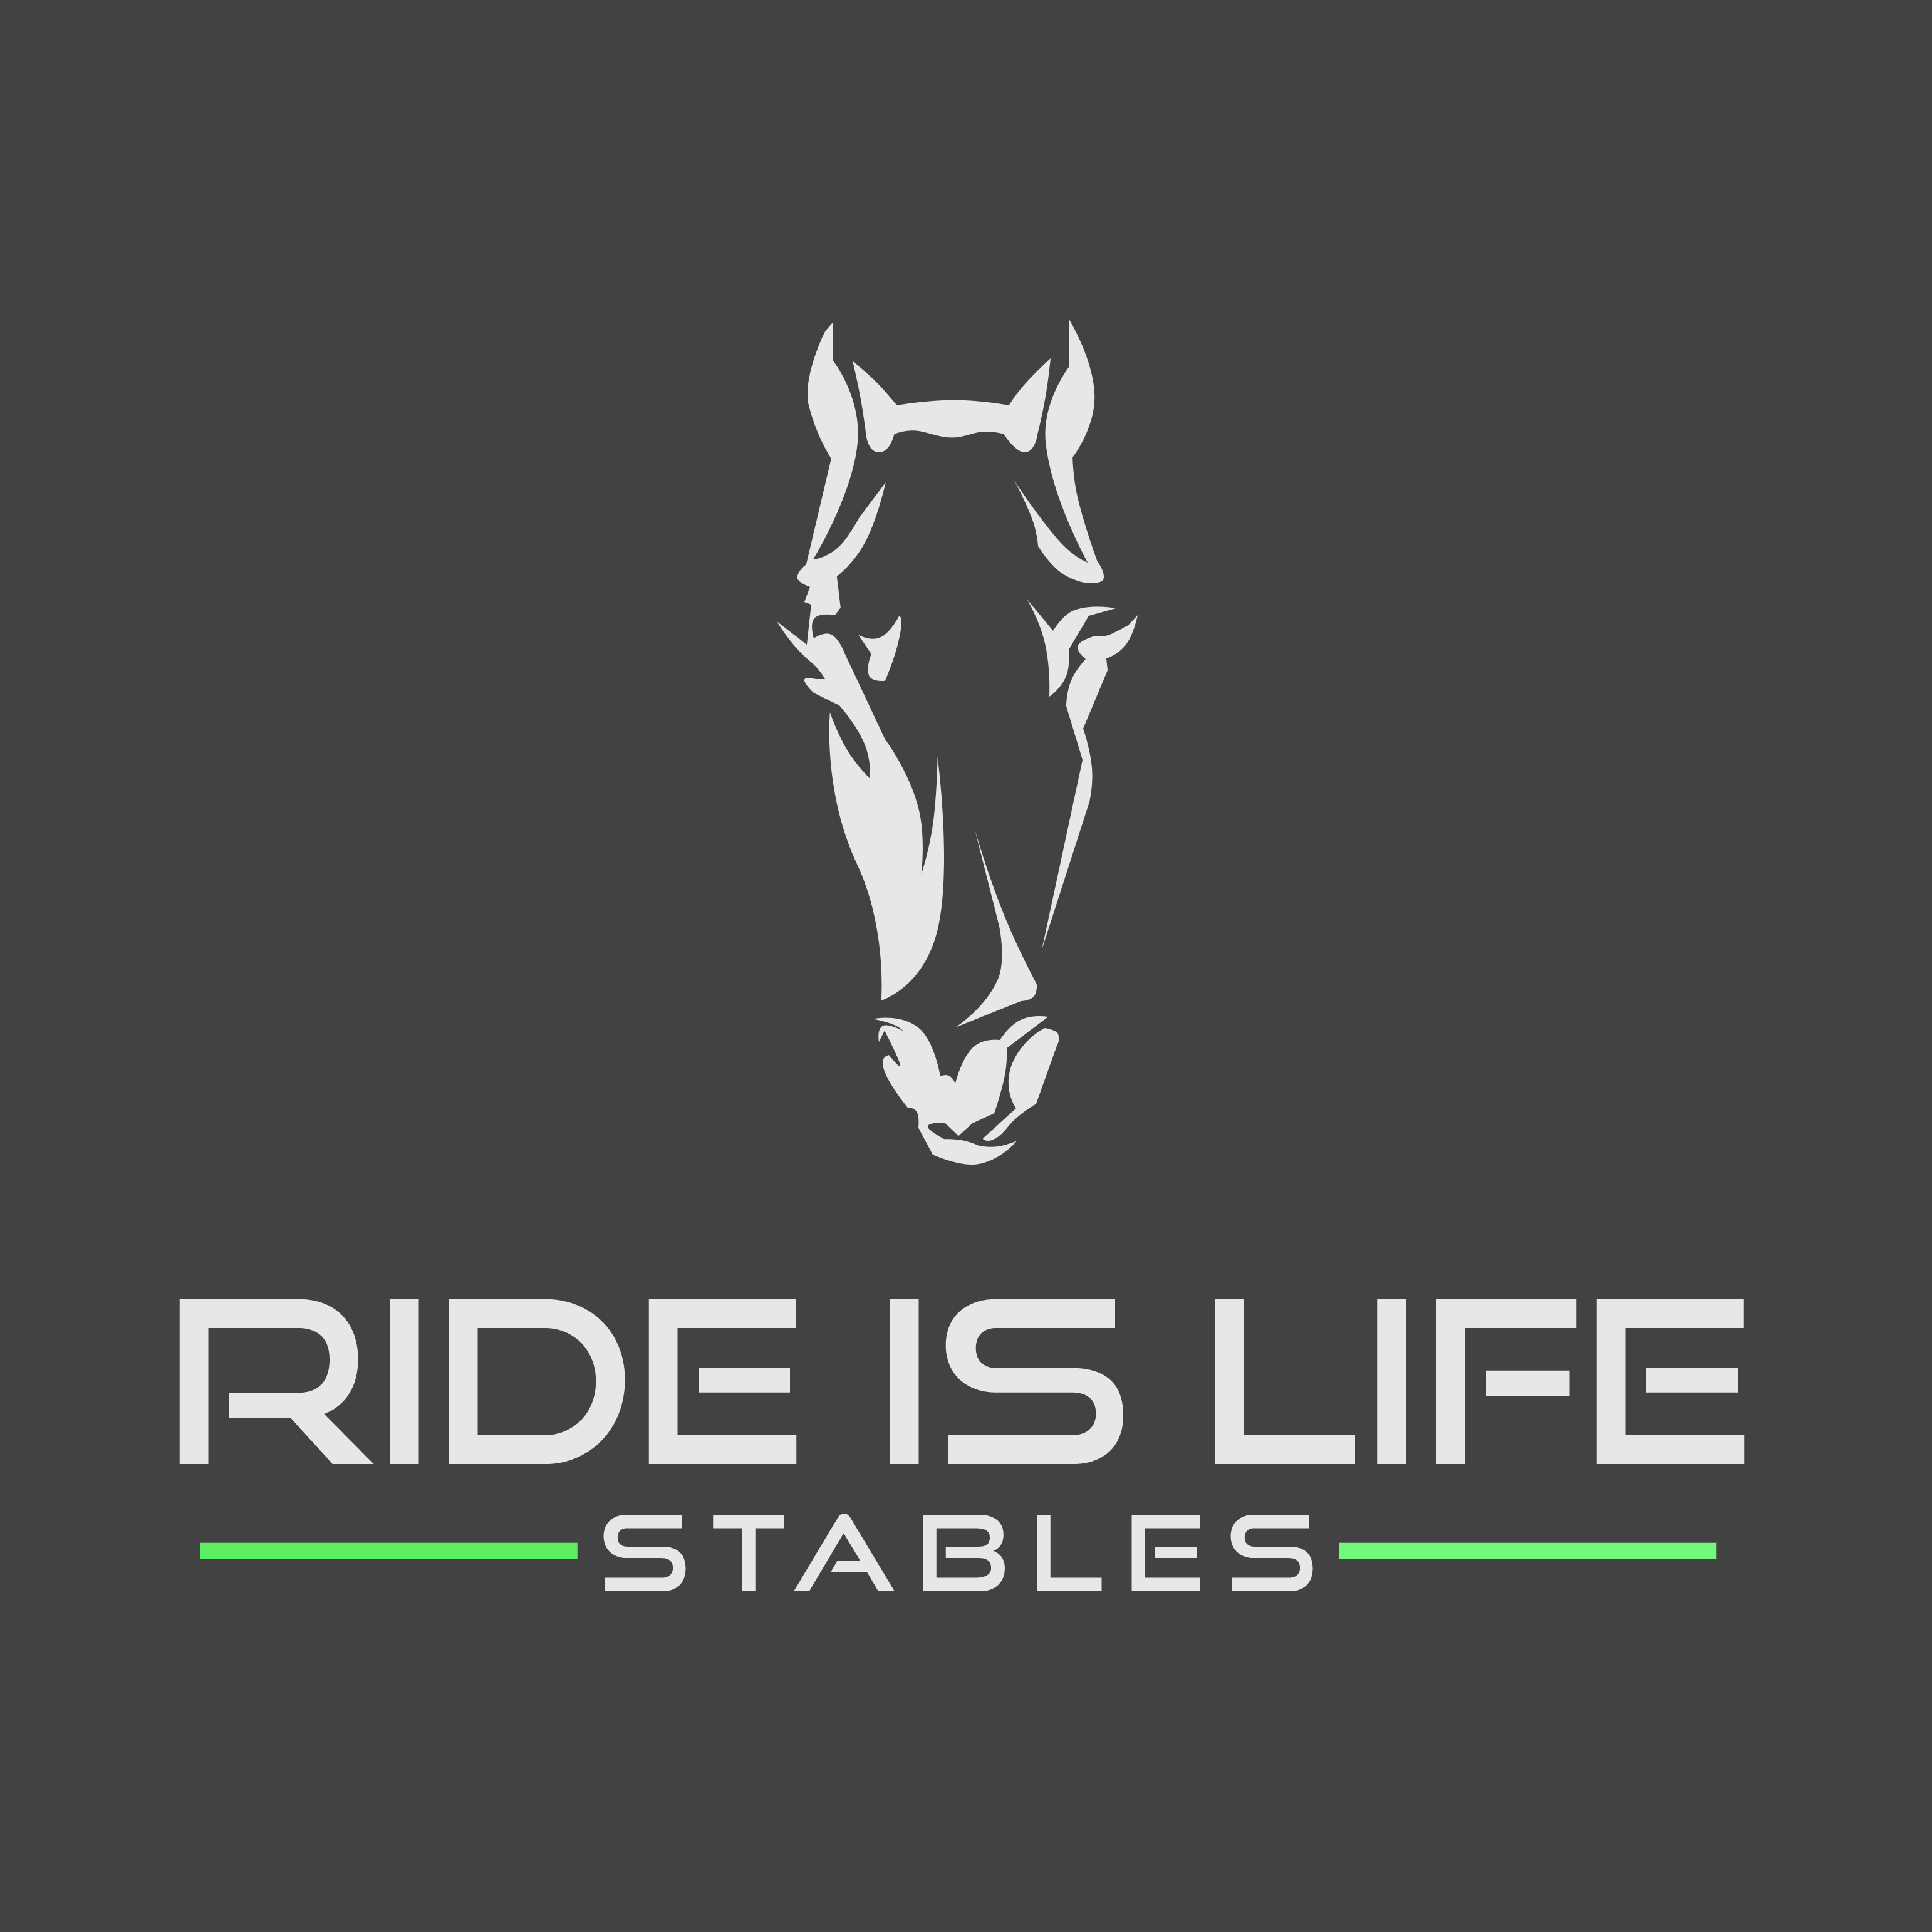 Ride Is Life stables logo